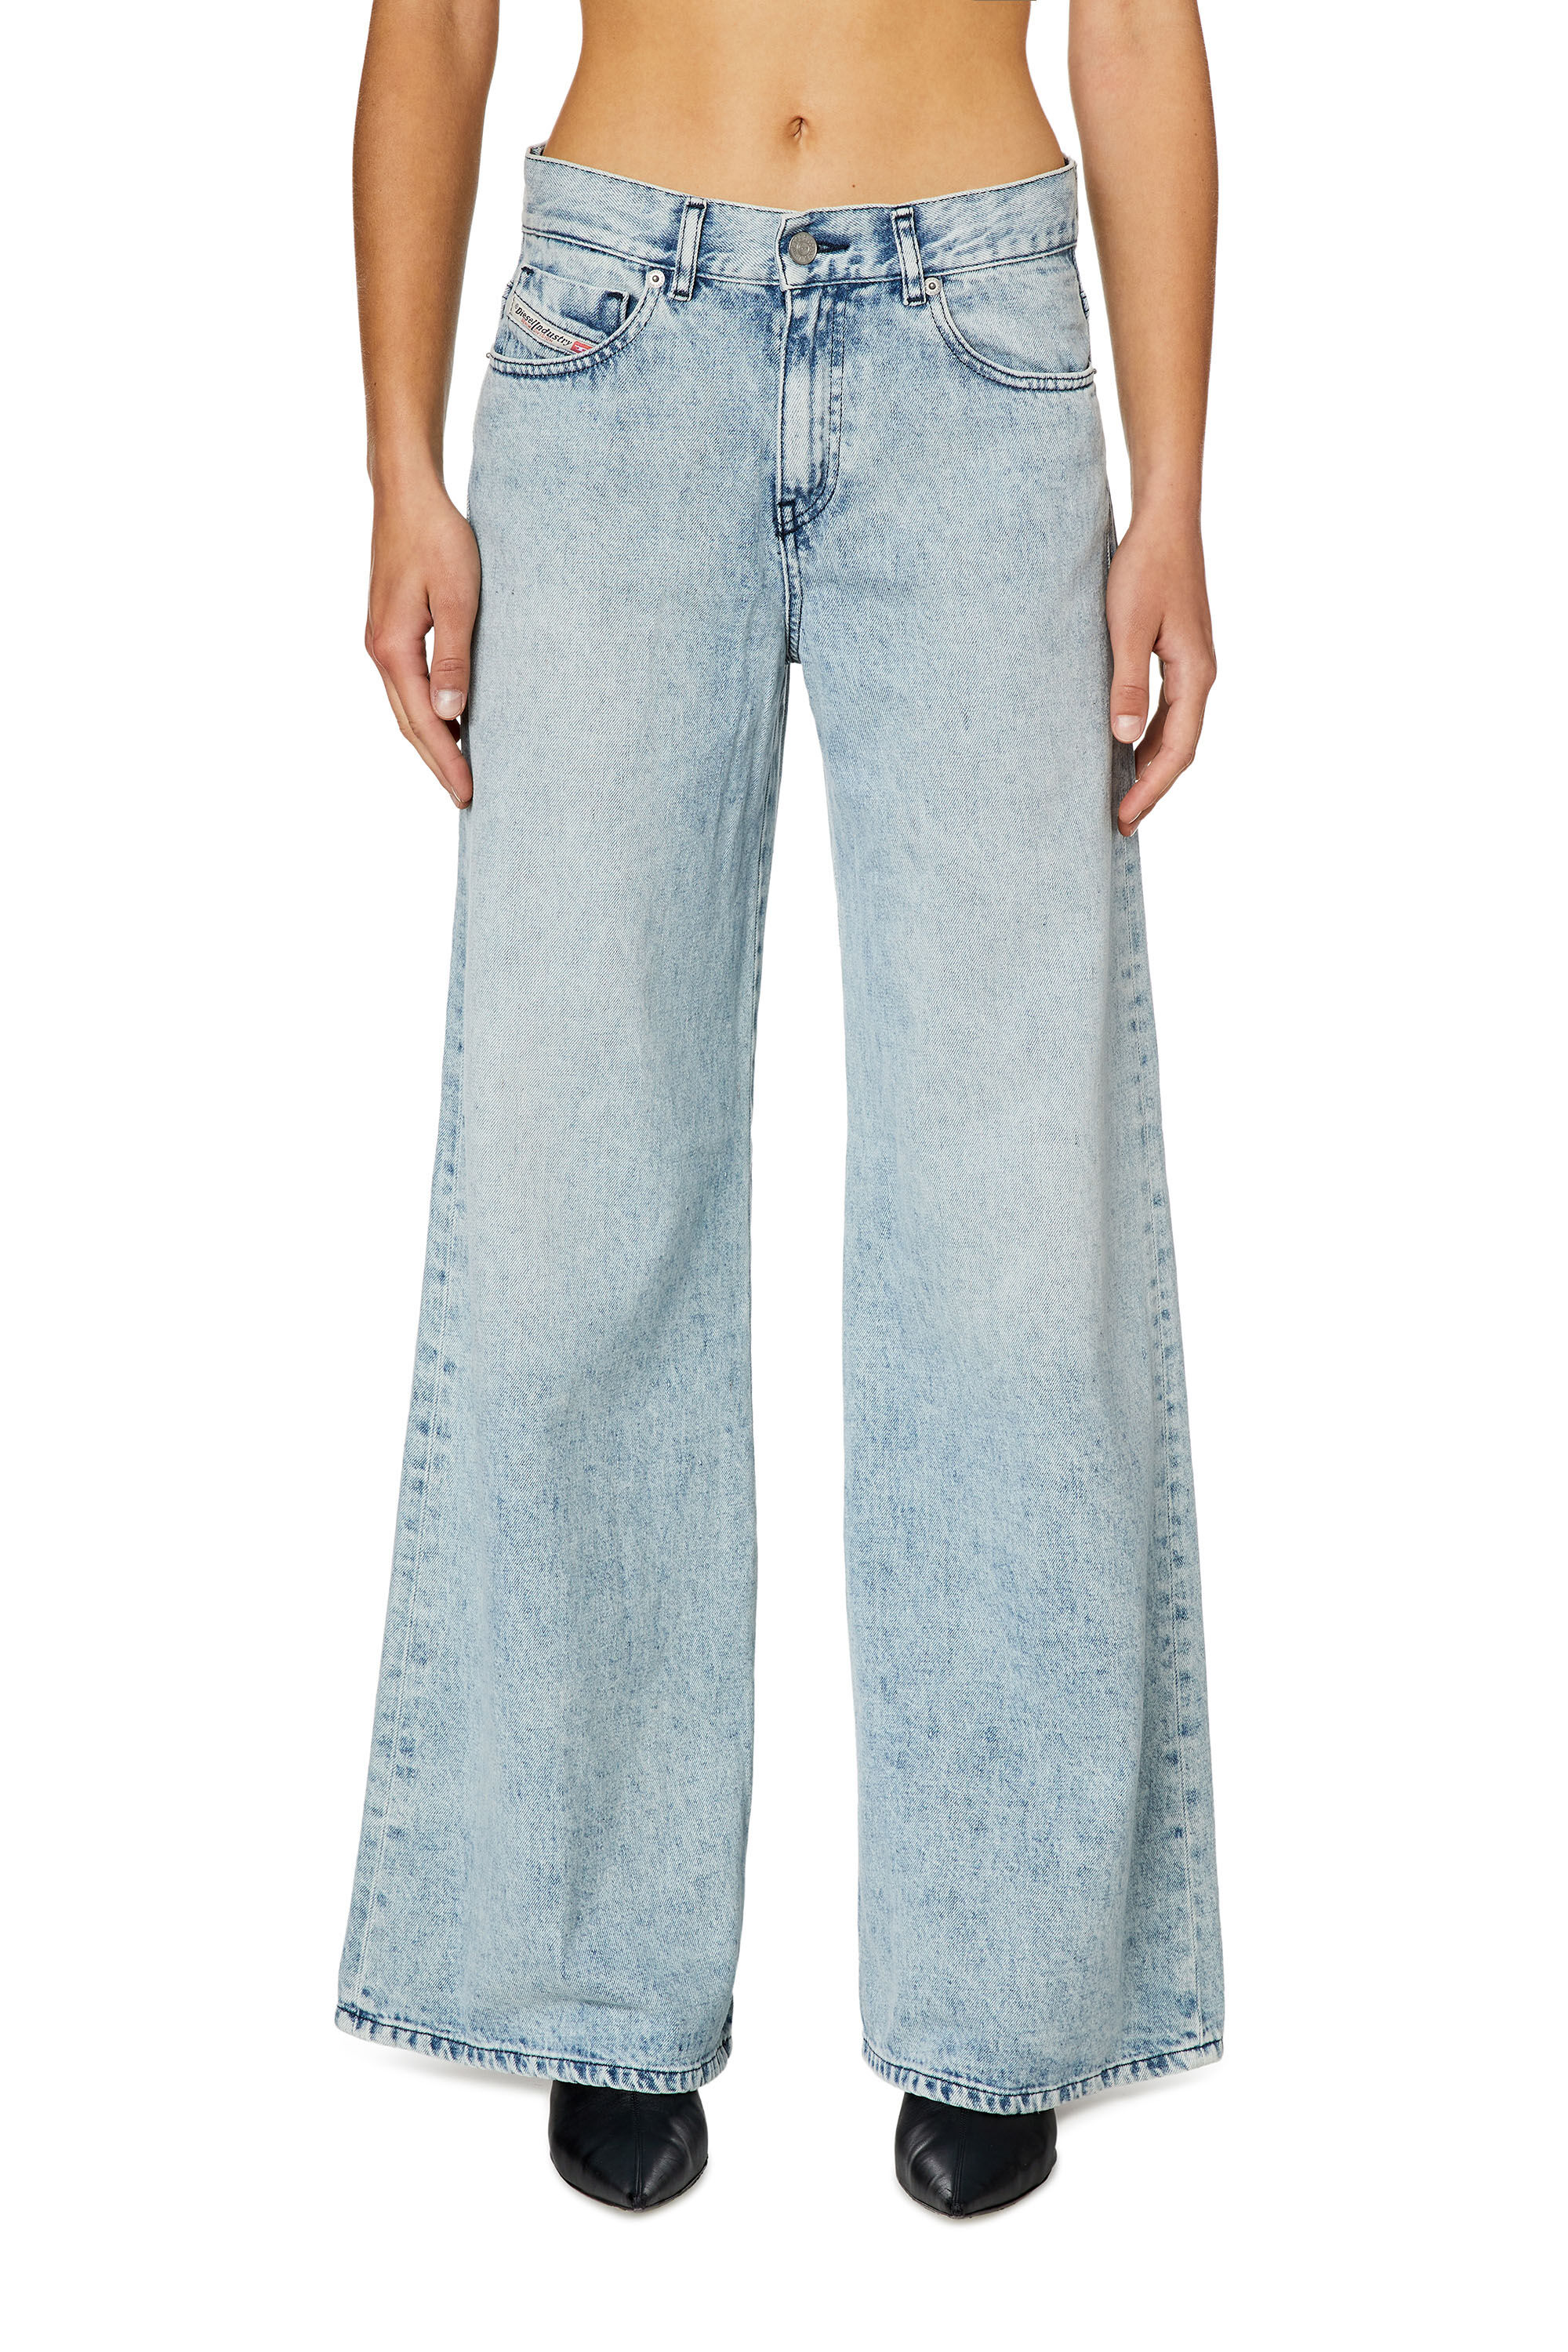 Women's Bootcut and Flare Jeans 1978 D-Akemi 09I79 | Diesel